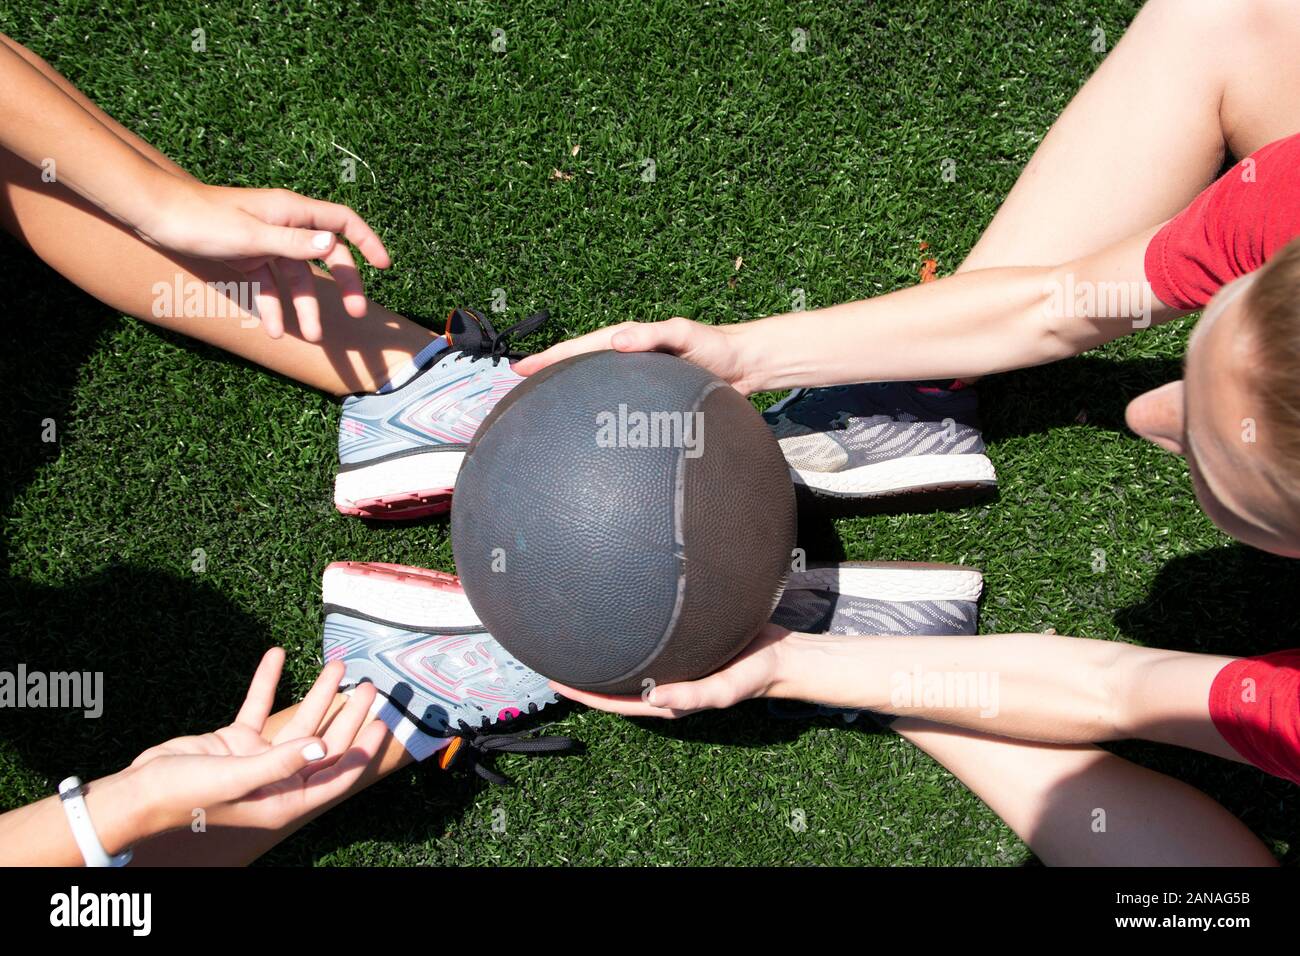 Two high school girls are passing a medicine ball while doing situps on a green turf field. Stock Photo